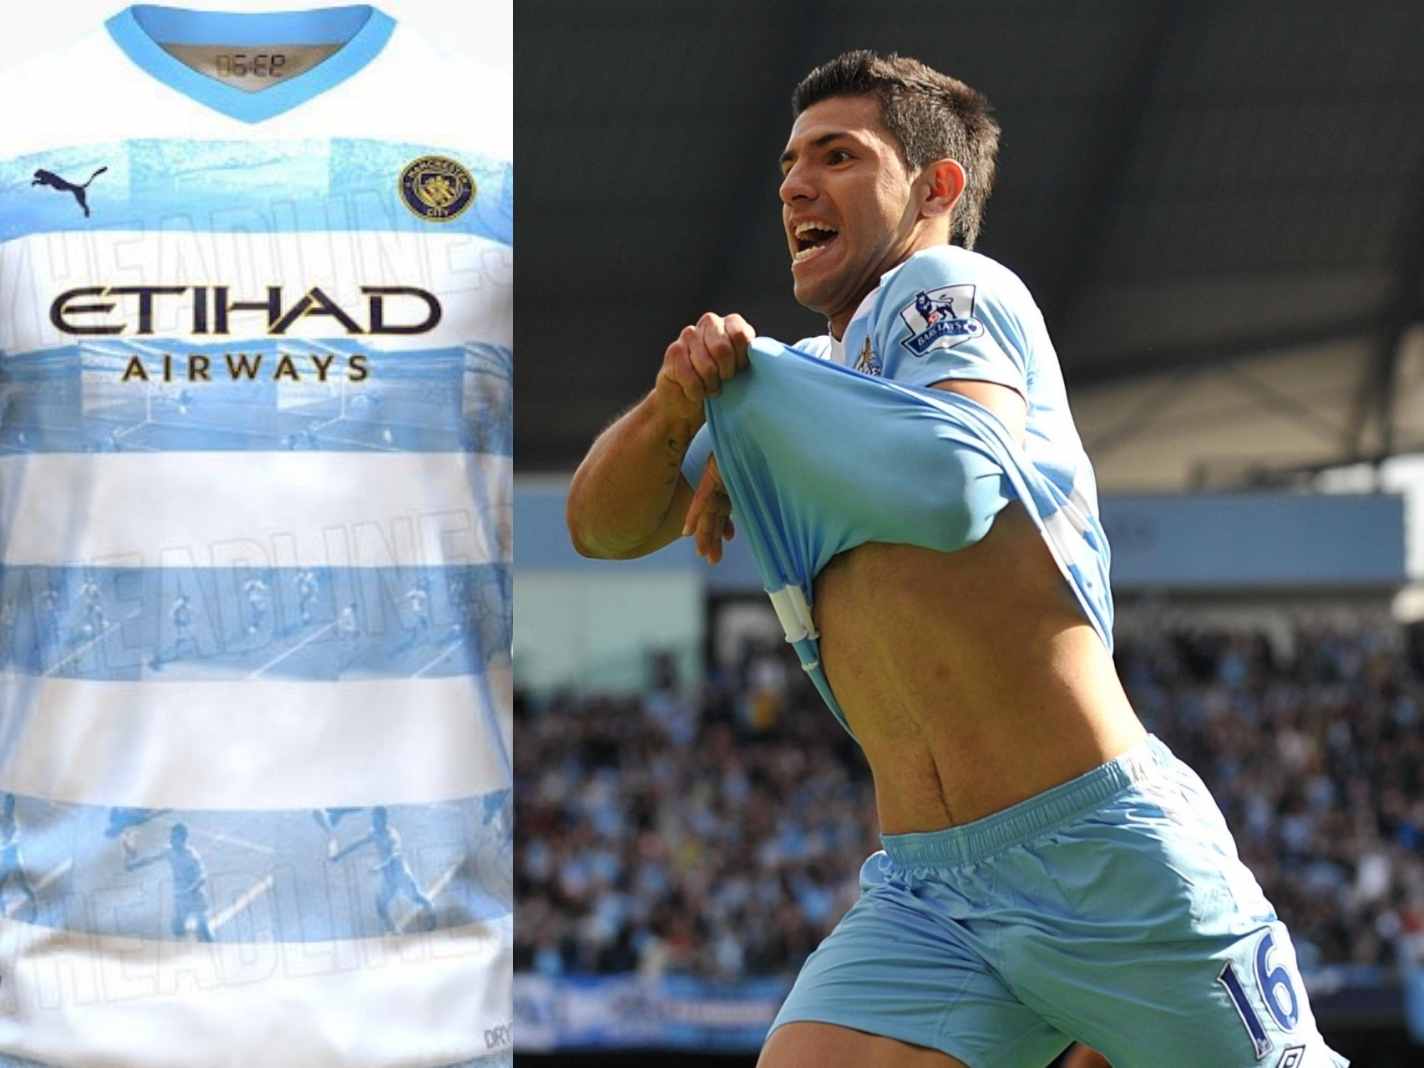 Man City set to release special kit on 10th anniversary of Aguero's goal